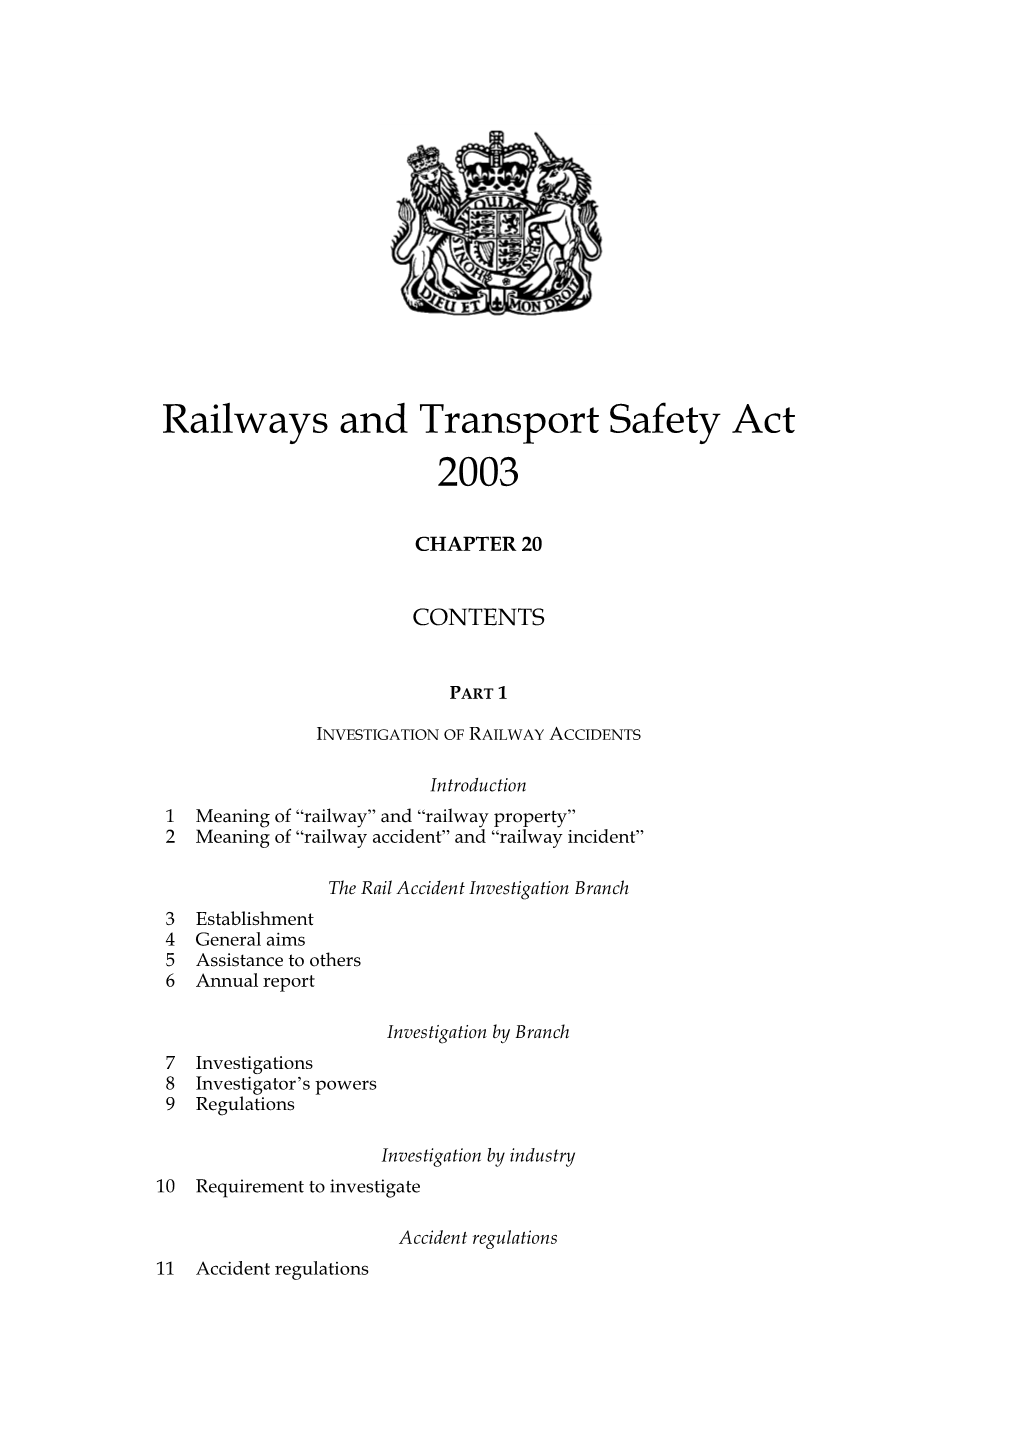 Railways and Transport Safety Act 2003